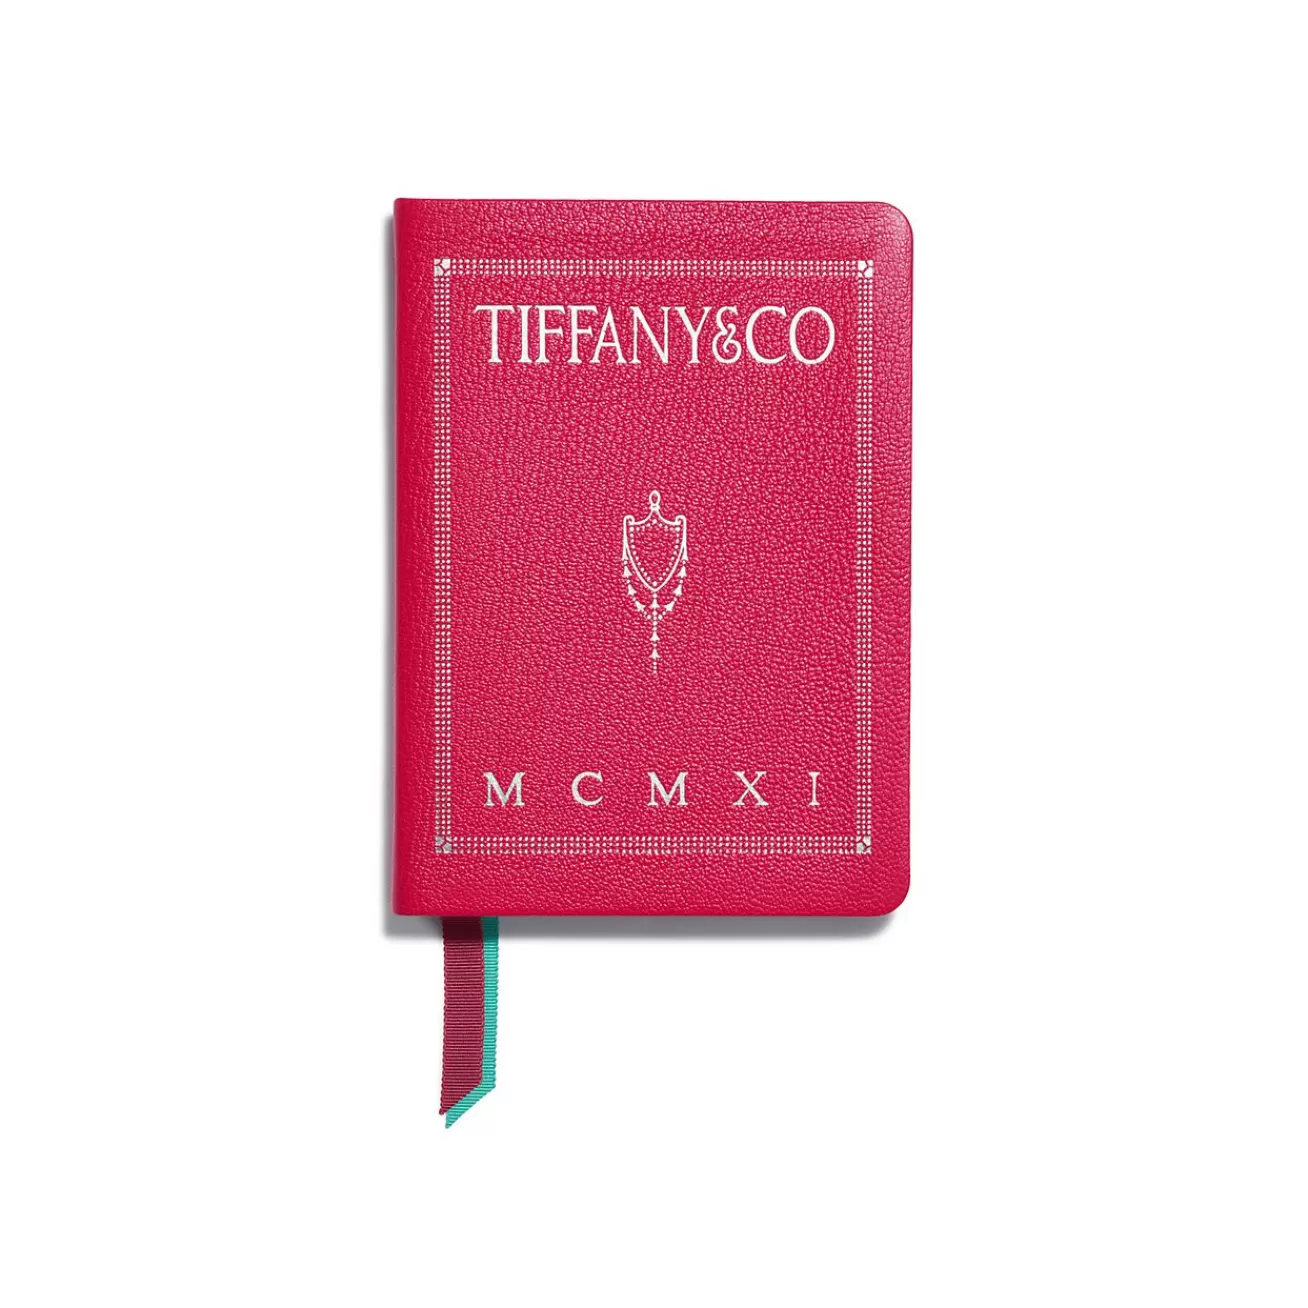 Tiffany & Co. Personal Essentials Notebook in Cerise Leather | ^ The Home | Housewarming Gifts